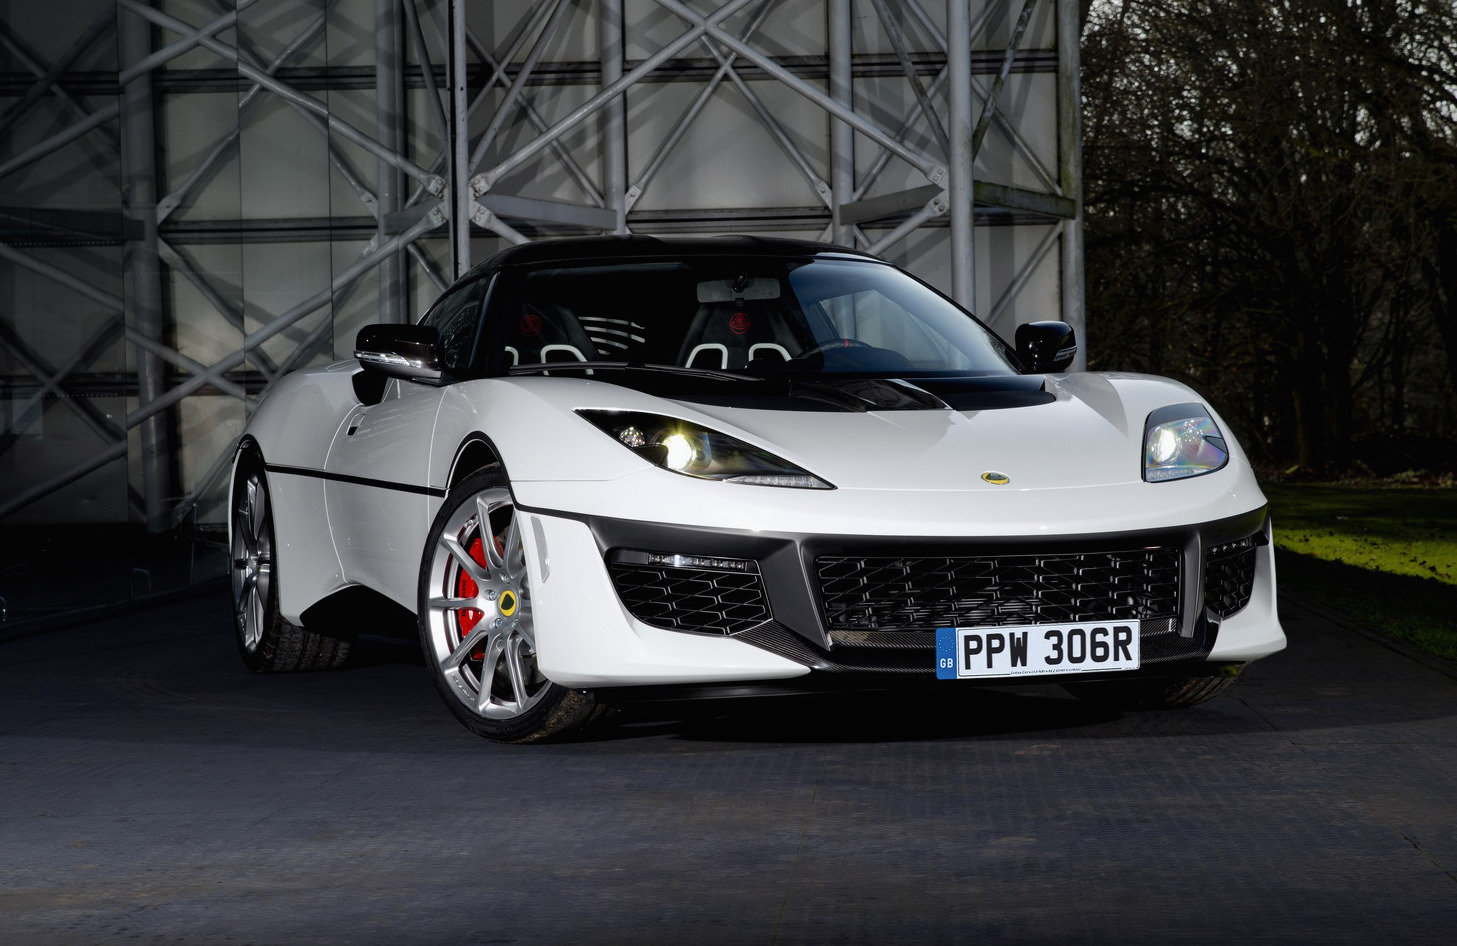 Lotus creates one-off Evora inspired by Esprit S1